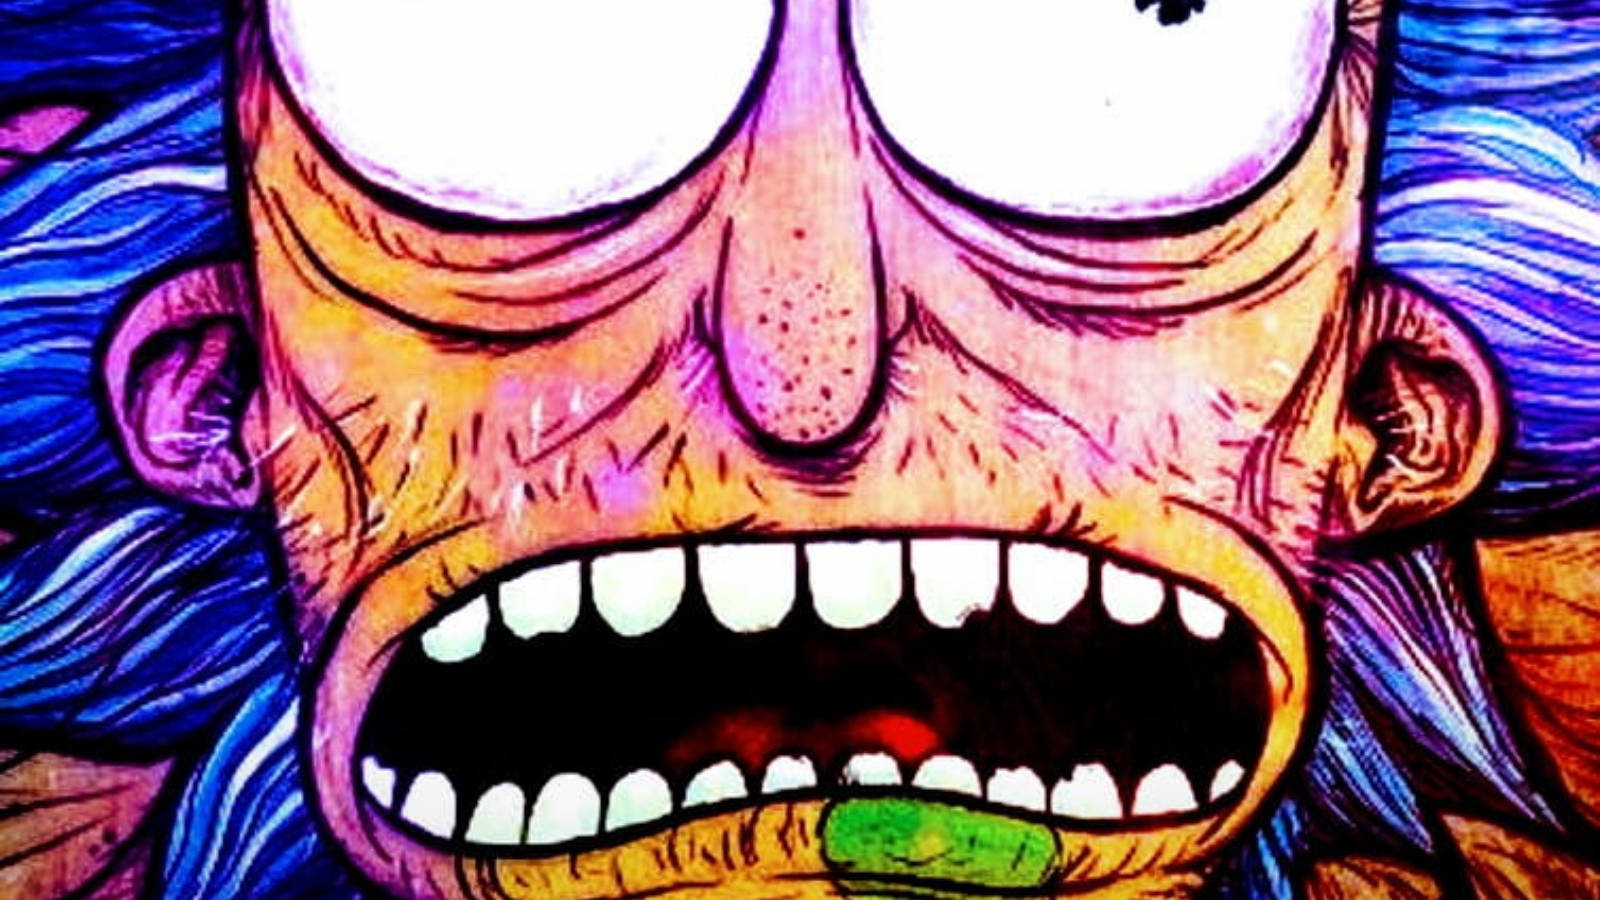 Closeup Rick And Morty Trippy Image Background